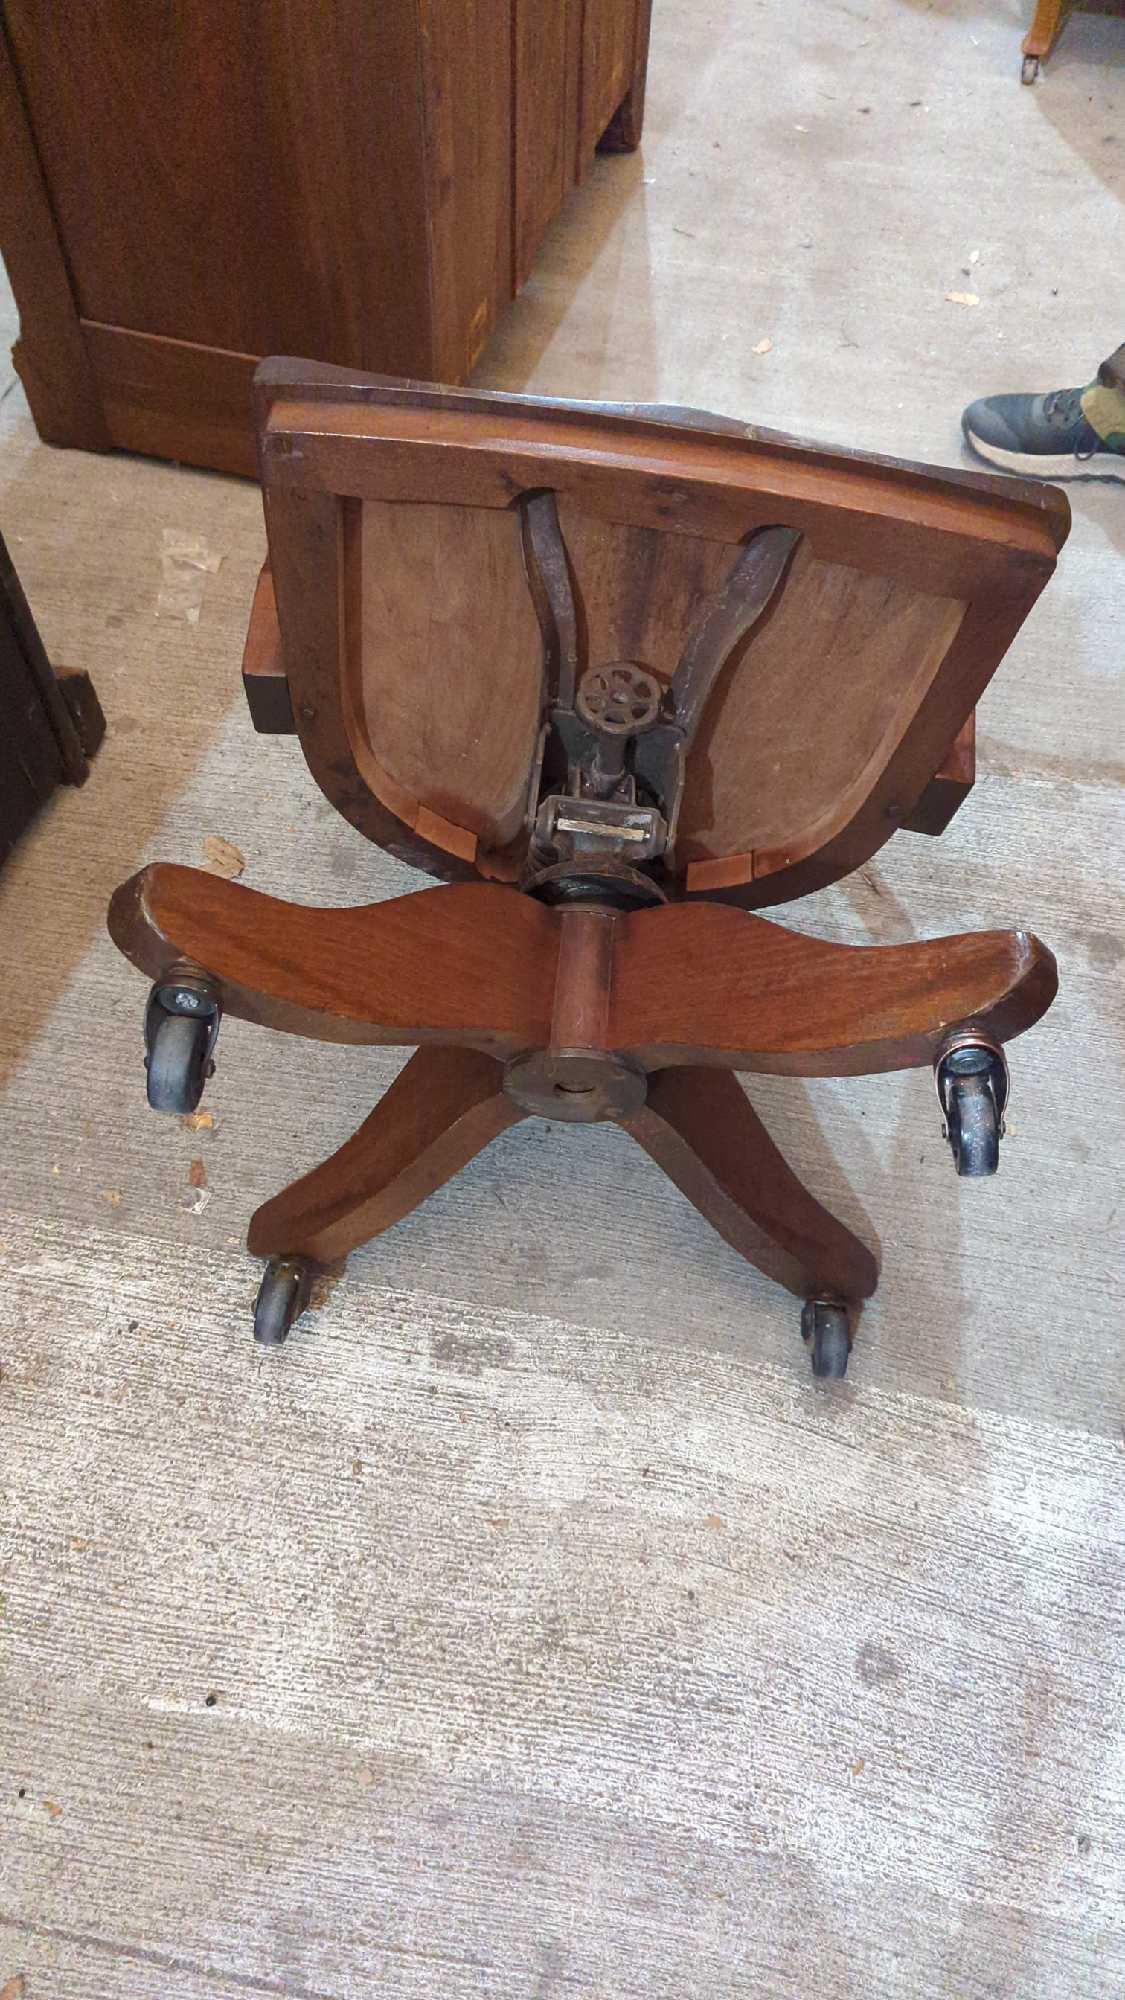 ANTIQUE WRITING DESK WITH CHAIR